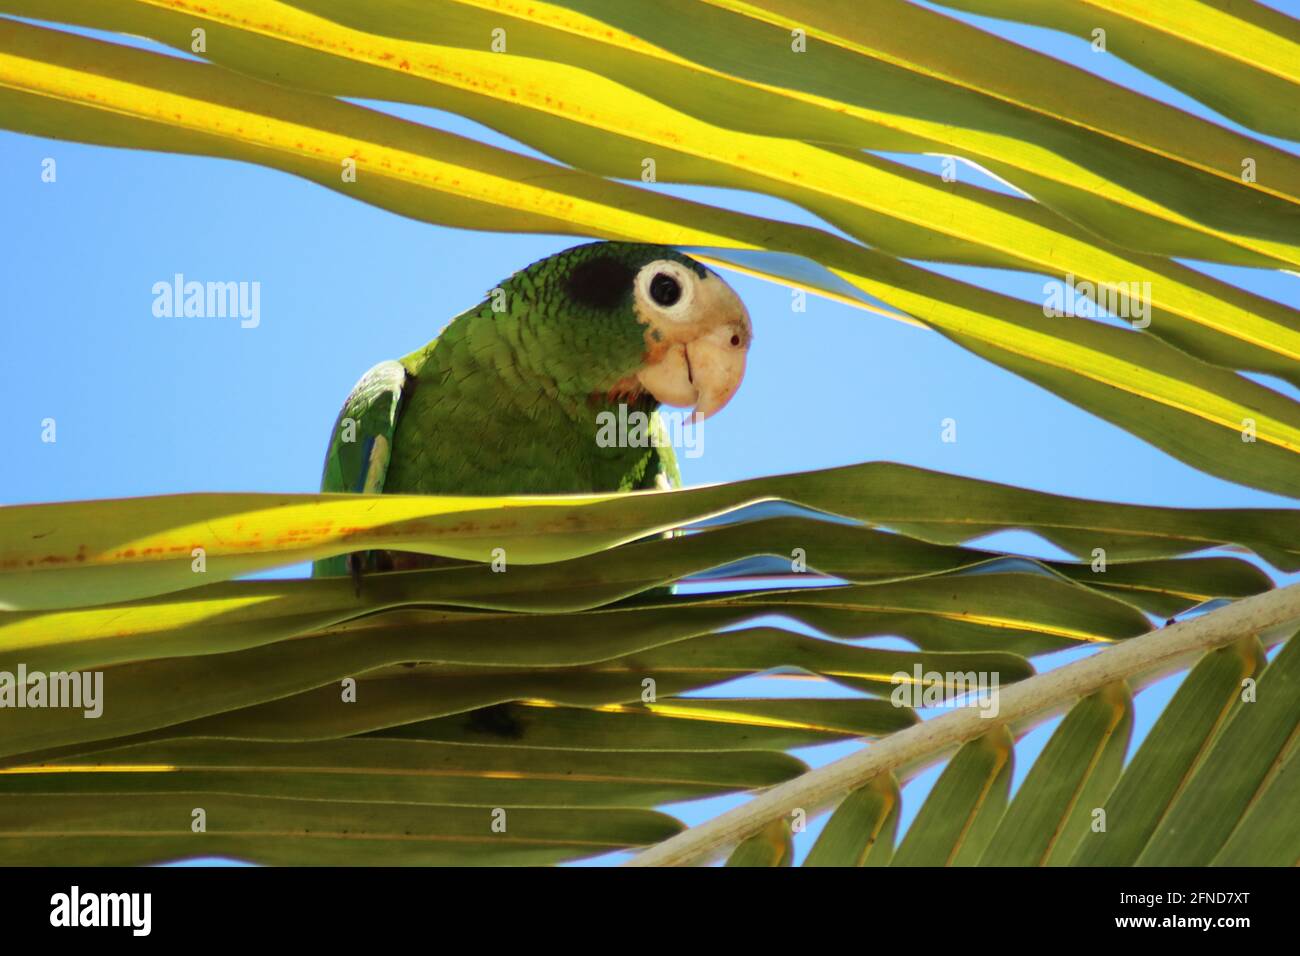 Funny parrot watching form the save side Stock Photo